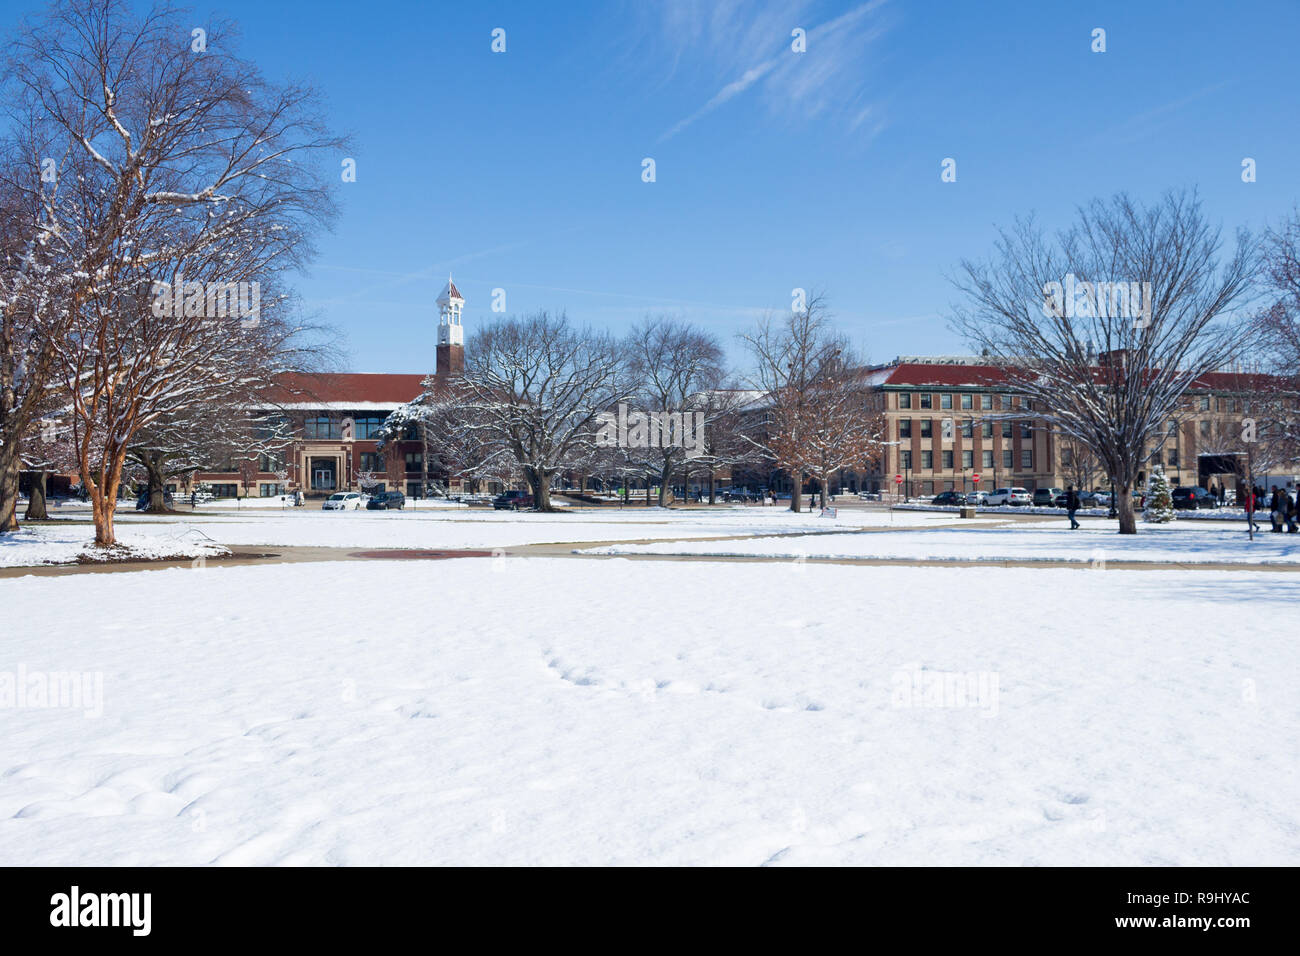 Memorial Mall with snow, Purdue University, West Lafayette, Indiana, United States Stock Photo